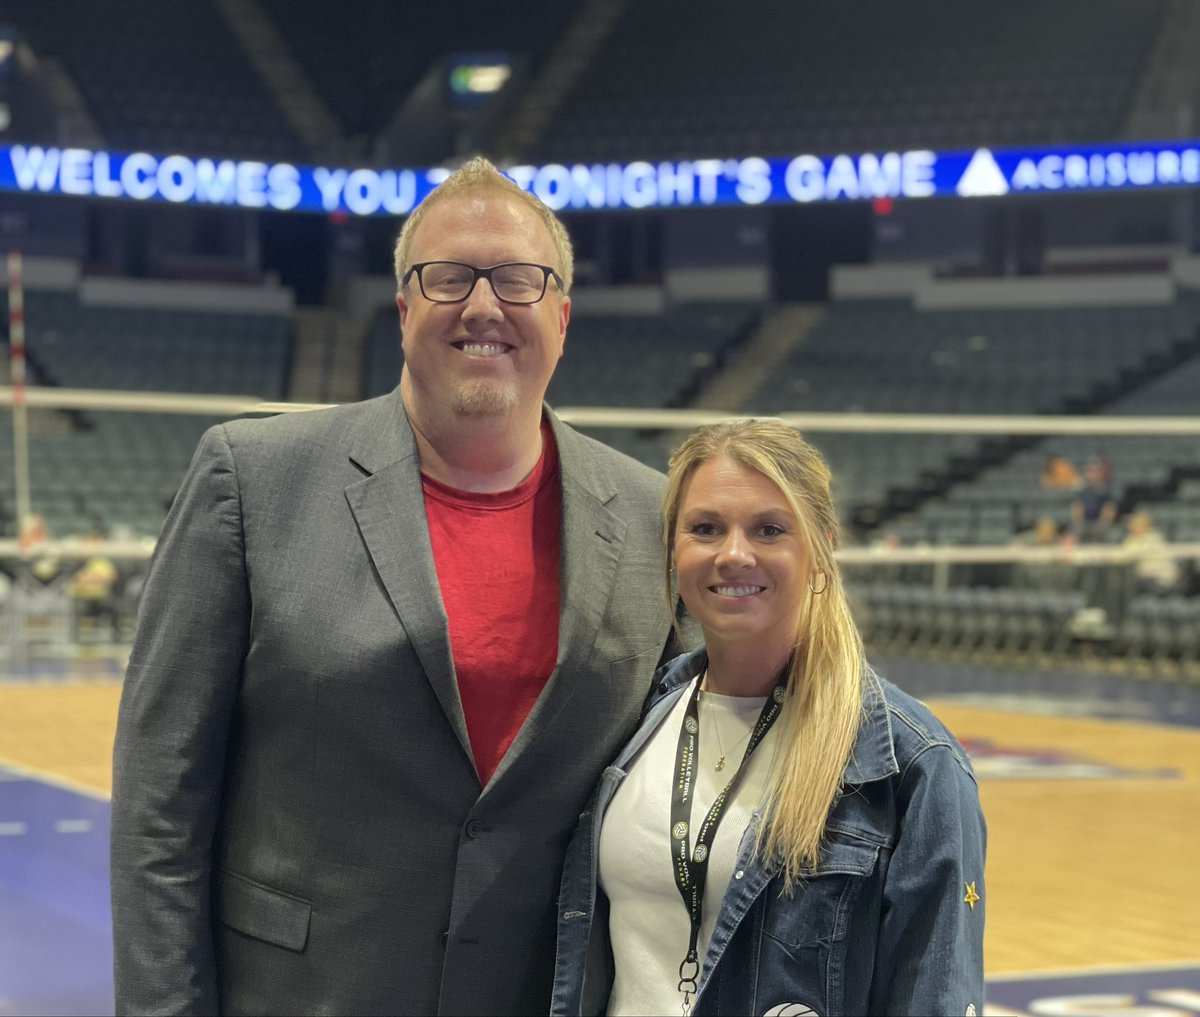 Like the sign says behind us, we ‘welcomes you to tonight’s game’. It’s the @GR_Rise and @orlvalkyries tonight from @VanAndelArena. @KayOh11 & I got you covered on @961game and @YouTube beginning at 6:45pm. Watch: youtube.com/live/-w6a6wxT1… Listen: 961thegame.iheart.com